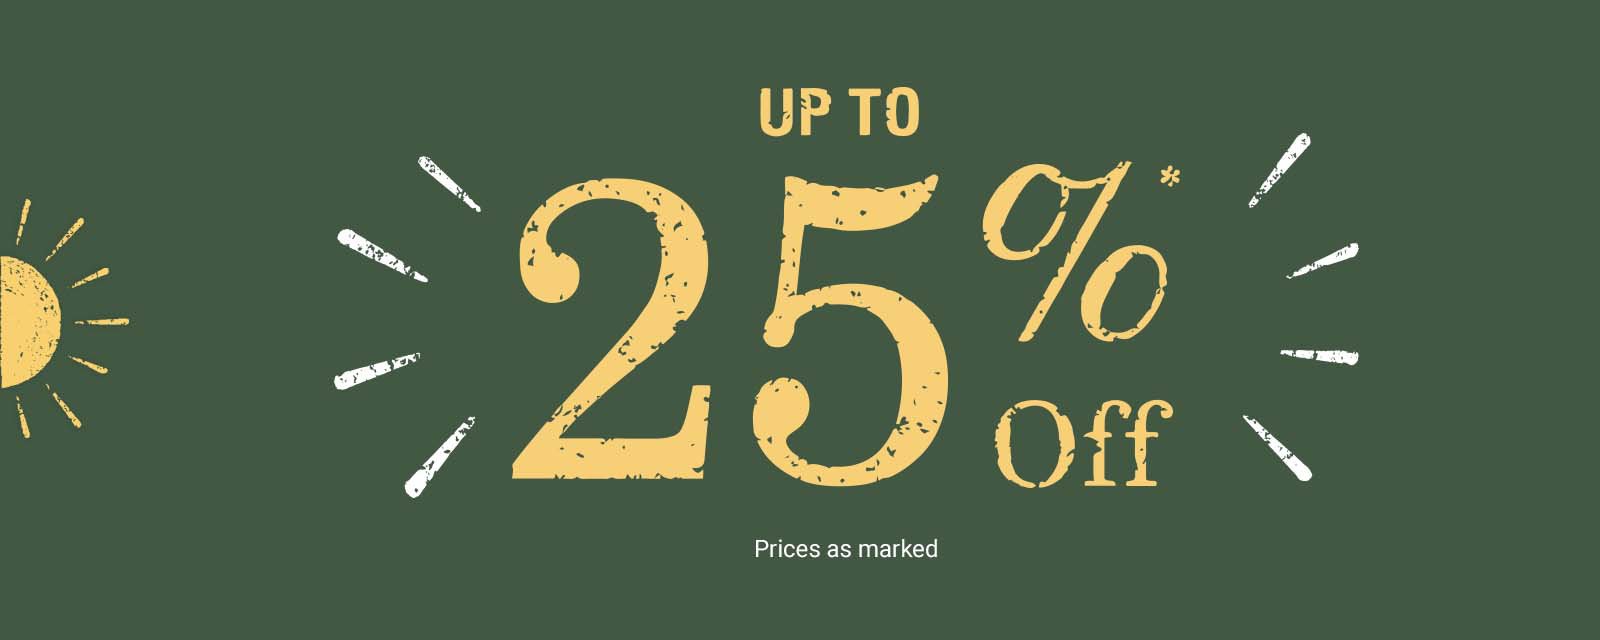 up to 25 percent off prices as marked